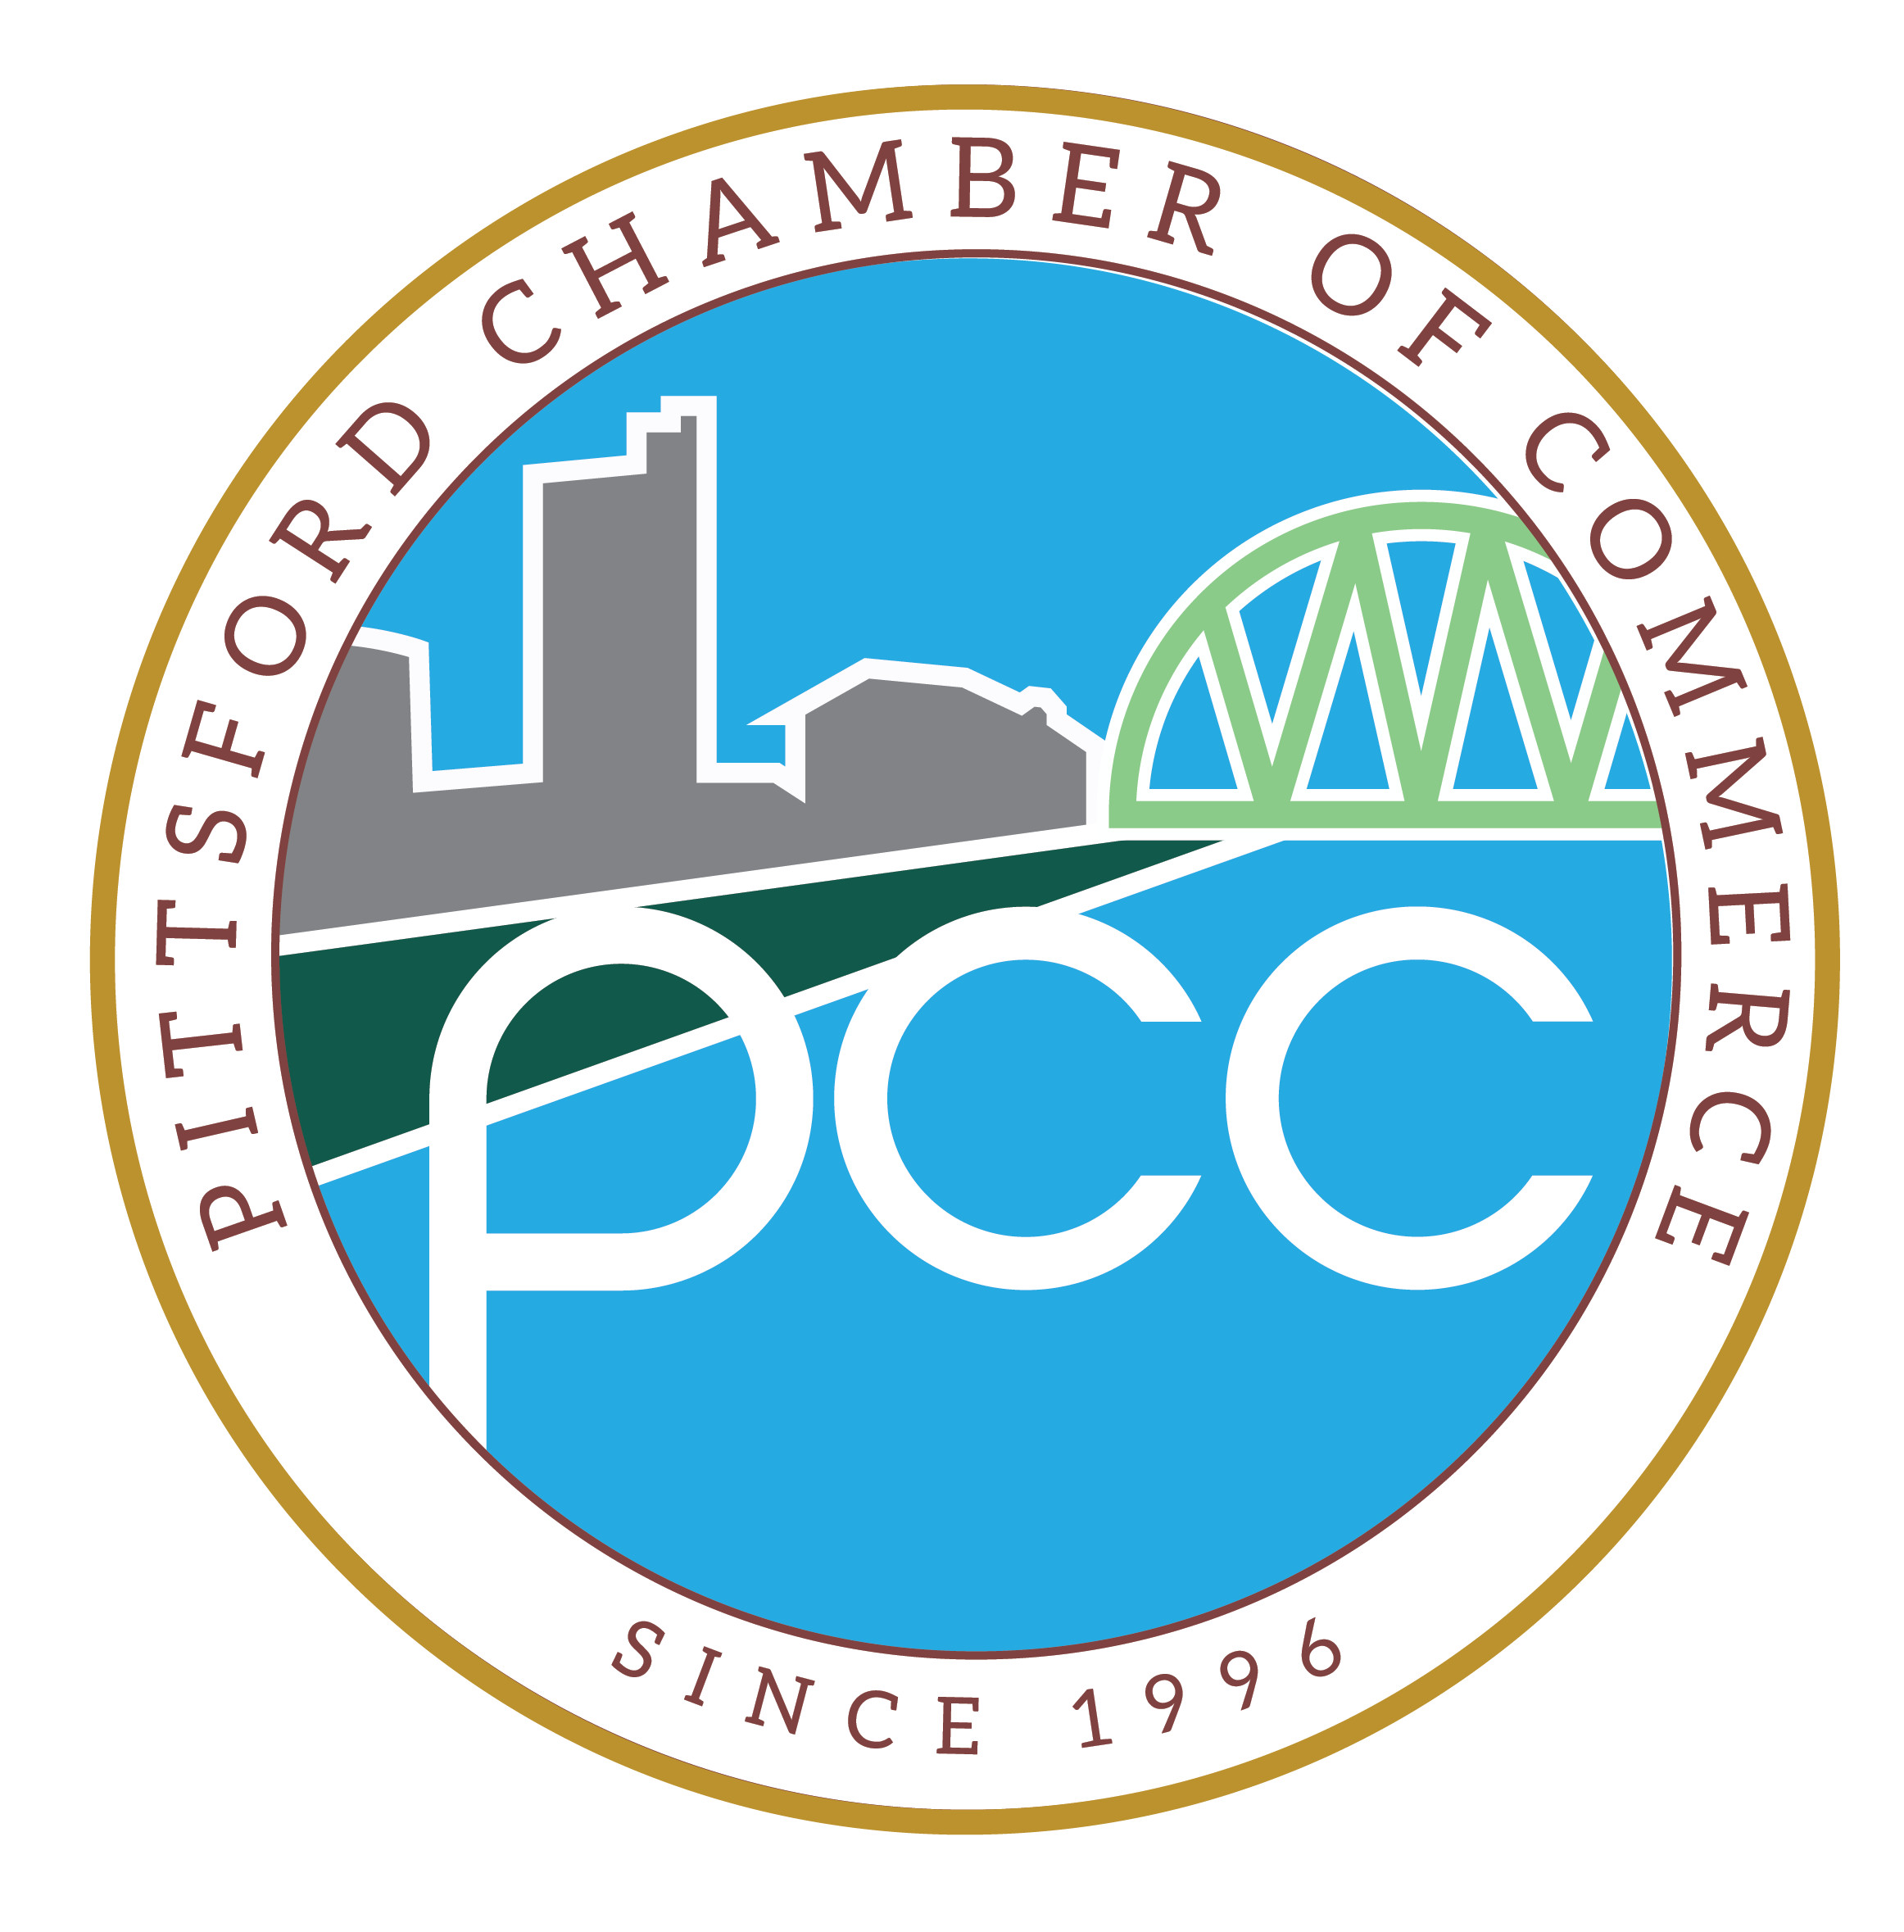 Pittsford Chamber of Commerce